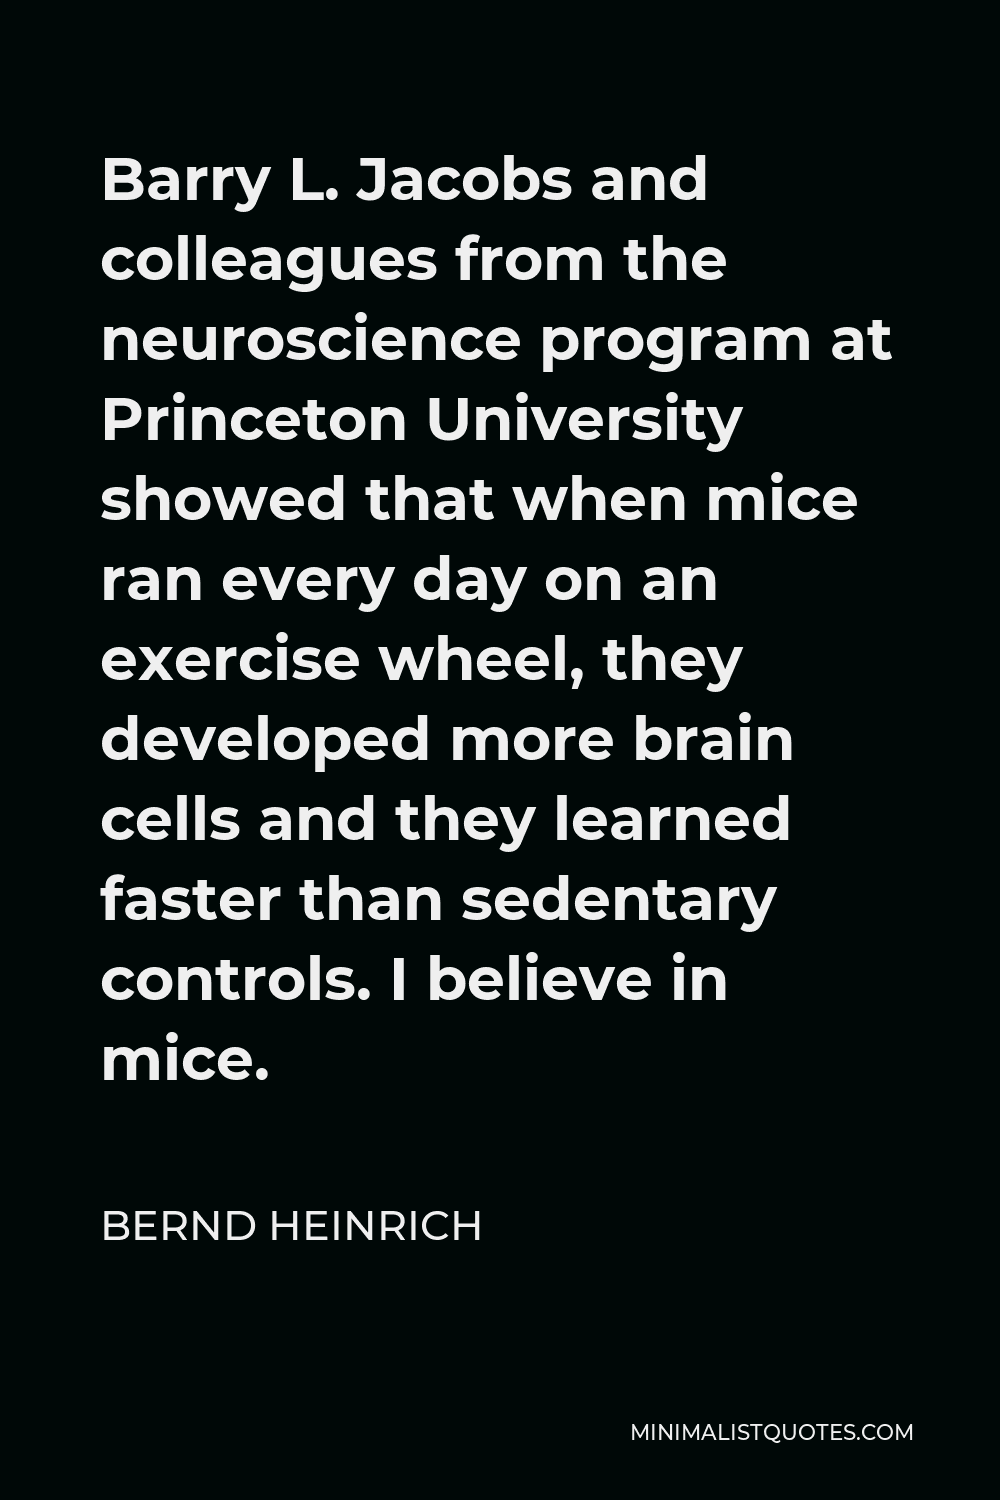 Bernd Heinrich Quote - Barry L. Jacobs and colleagues from the neuroscience program at Princeton University showed that when mice ran every day on an exercise wheel, they developed more brain cells and they learned faster than sedentary controls. I believe in mice.